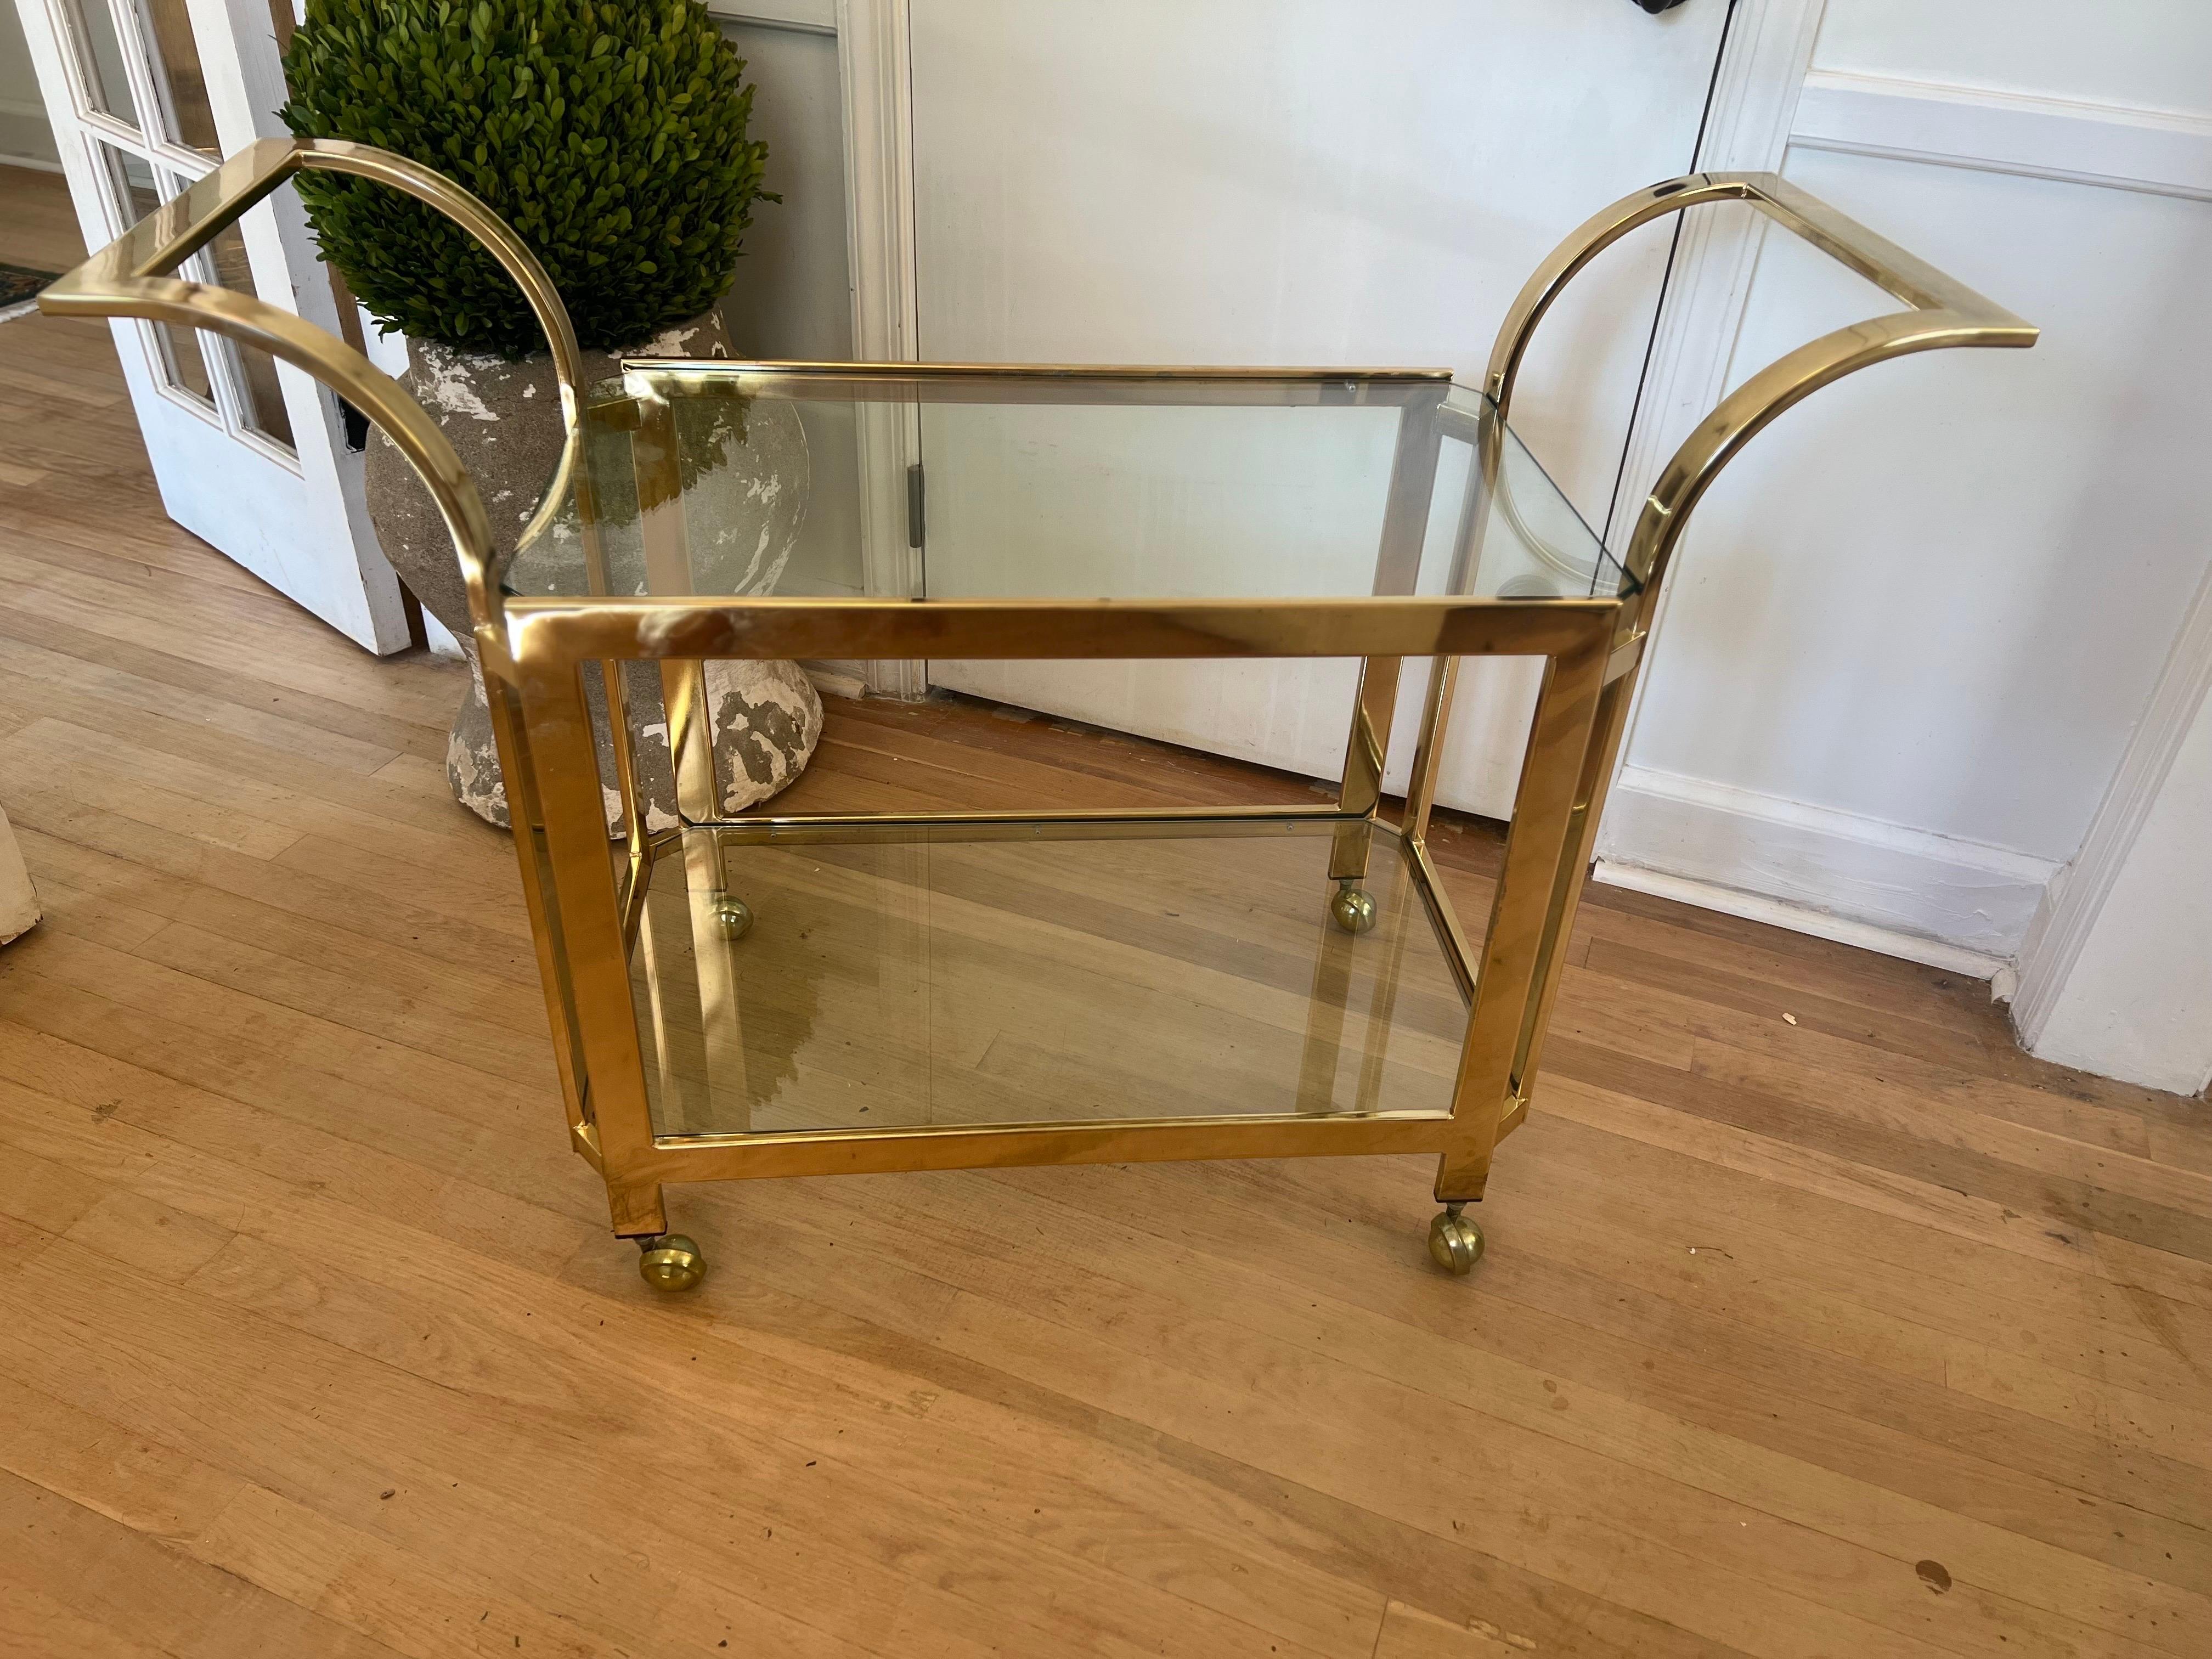 Mid Century Modern/MCM Two Tier Glass Bar Cart.  
Attributed to Milo Baughman/Thayer Coggin with flat bar curved brass contemporary/modern  design.
Four brass wheels that all roll smoothly. 

